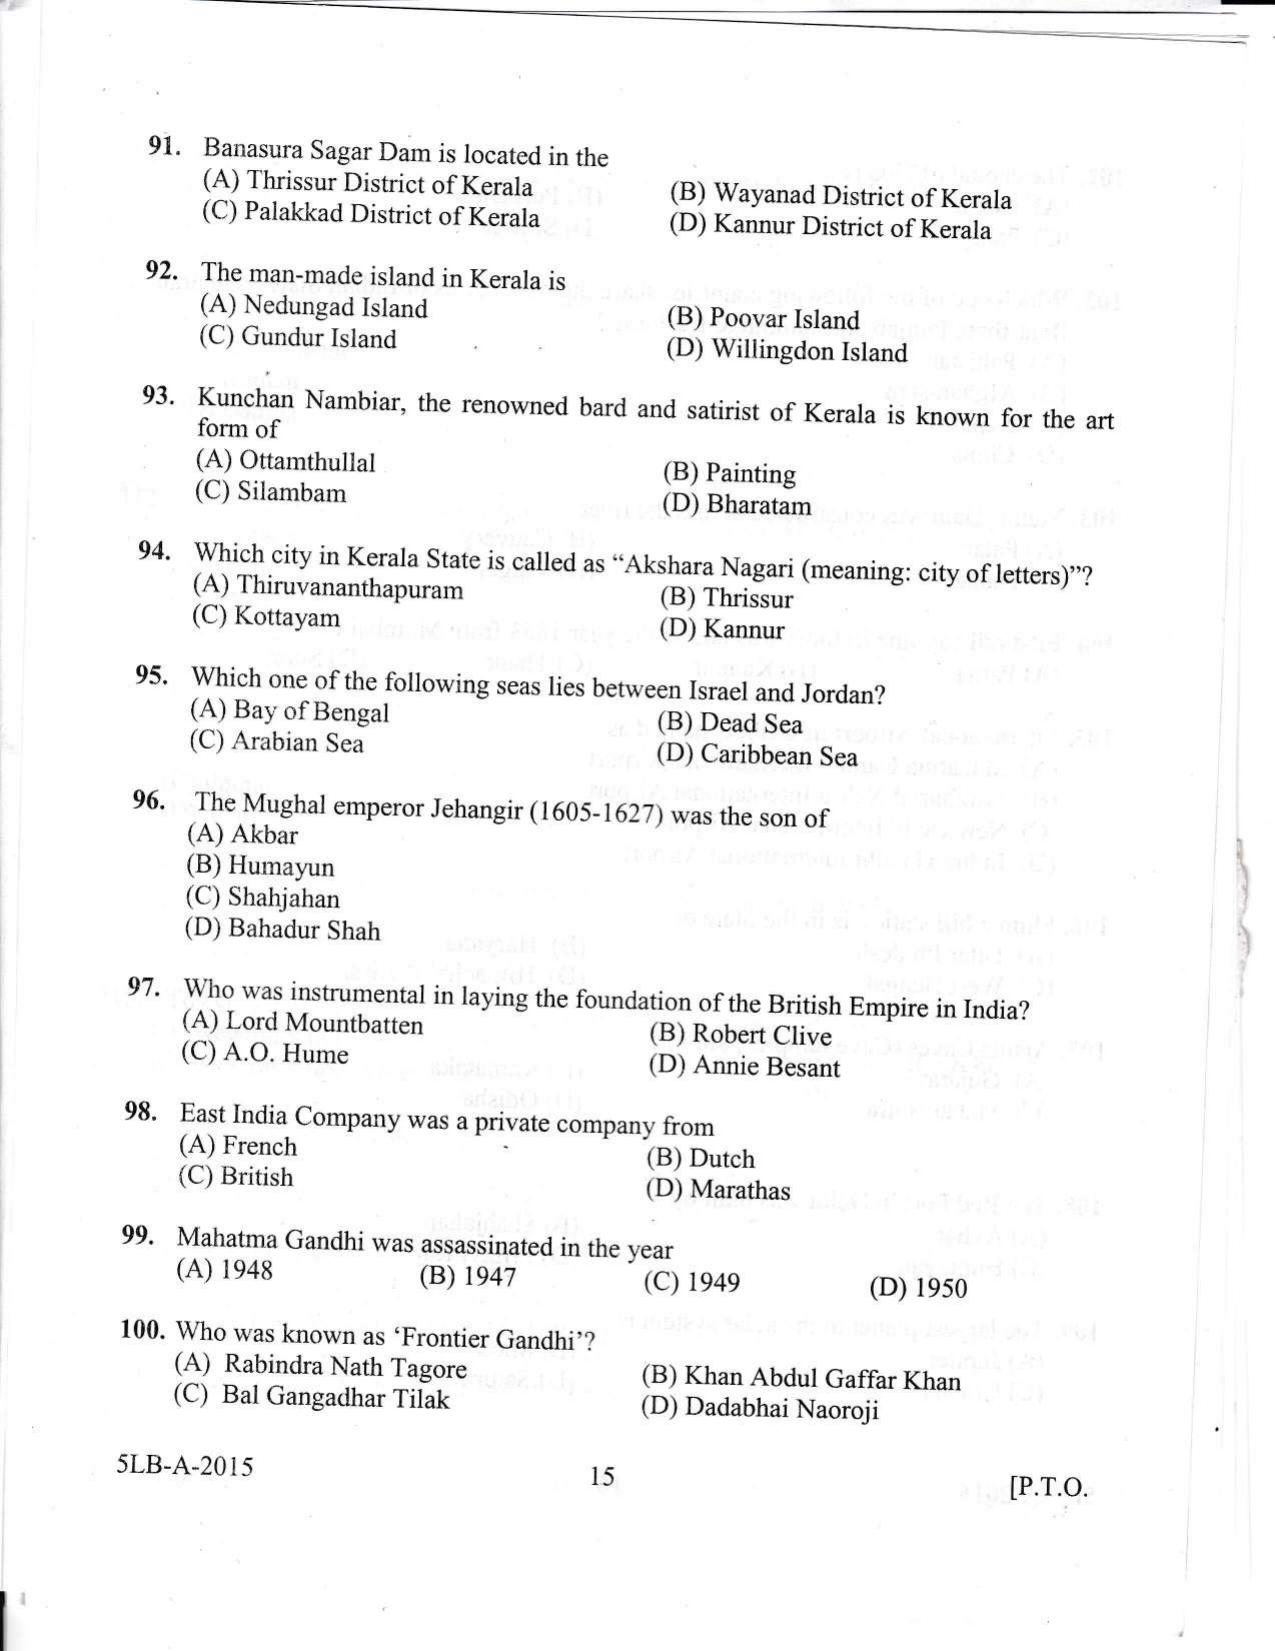 KLEE 5 Year LLB Exam 2015 Question Paper - Page 15